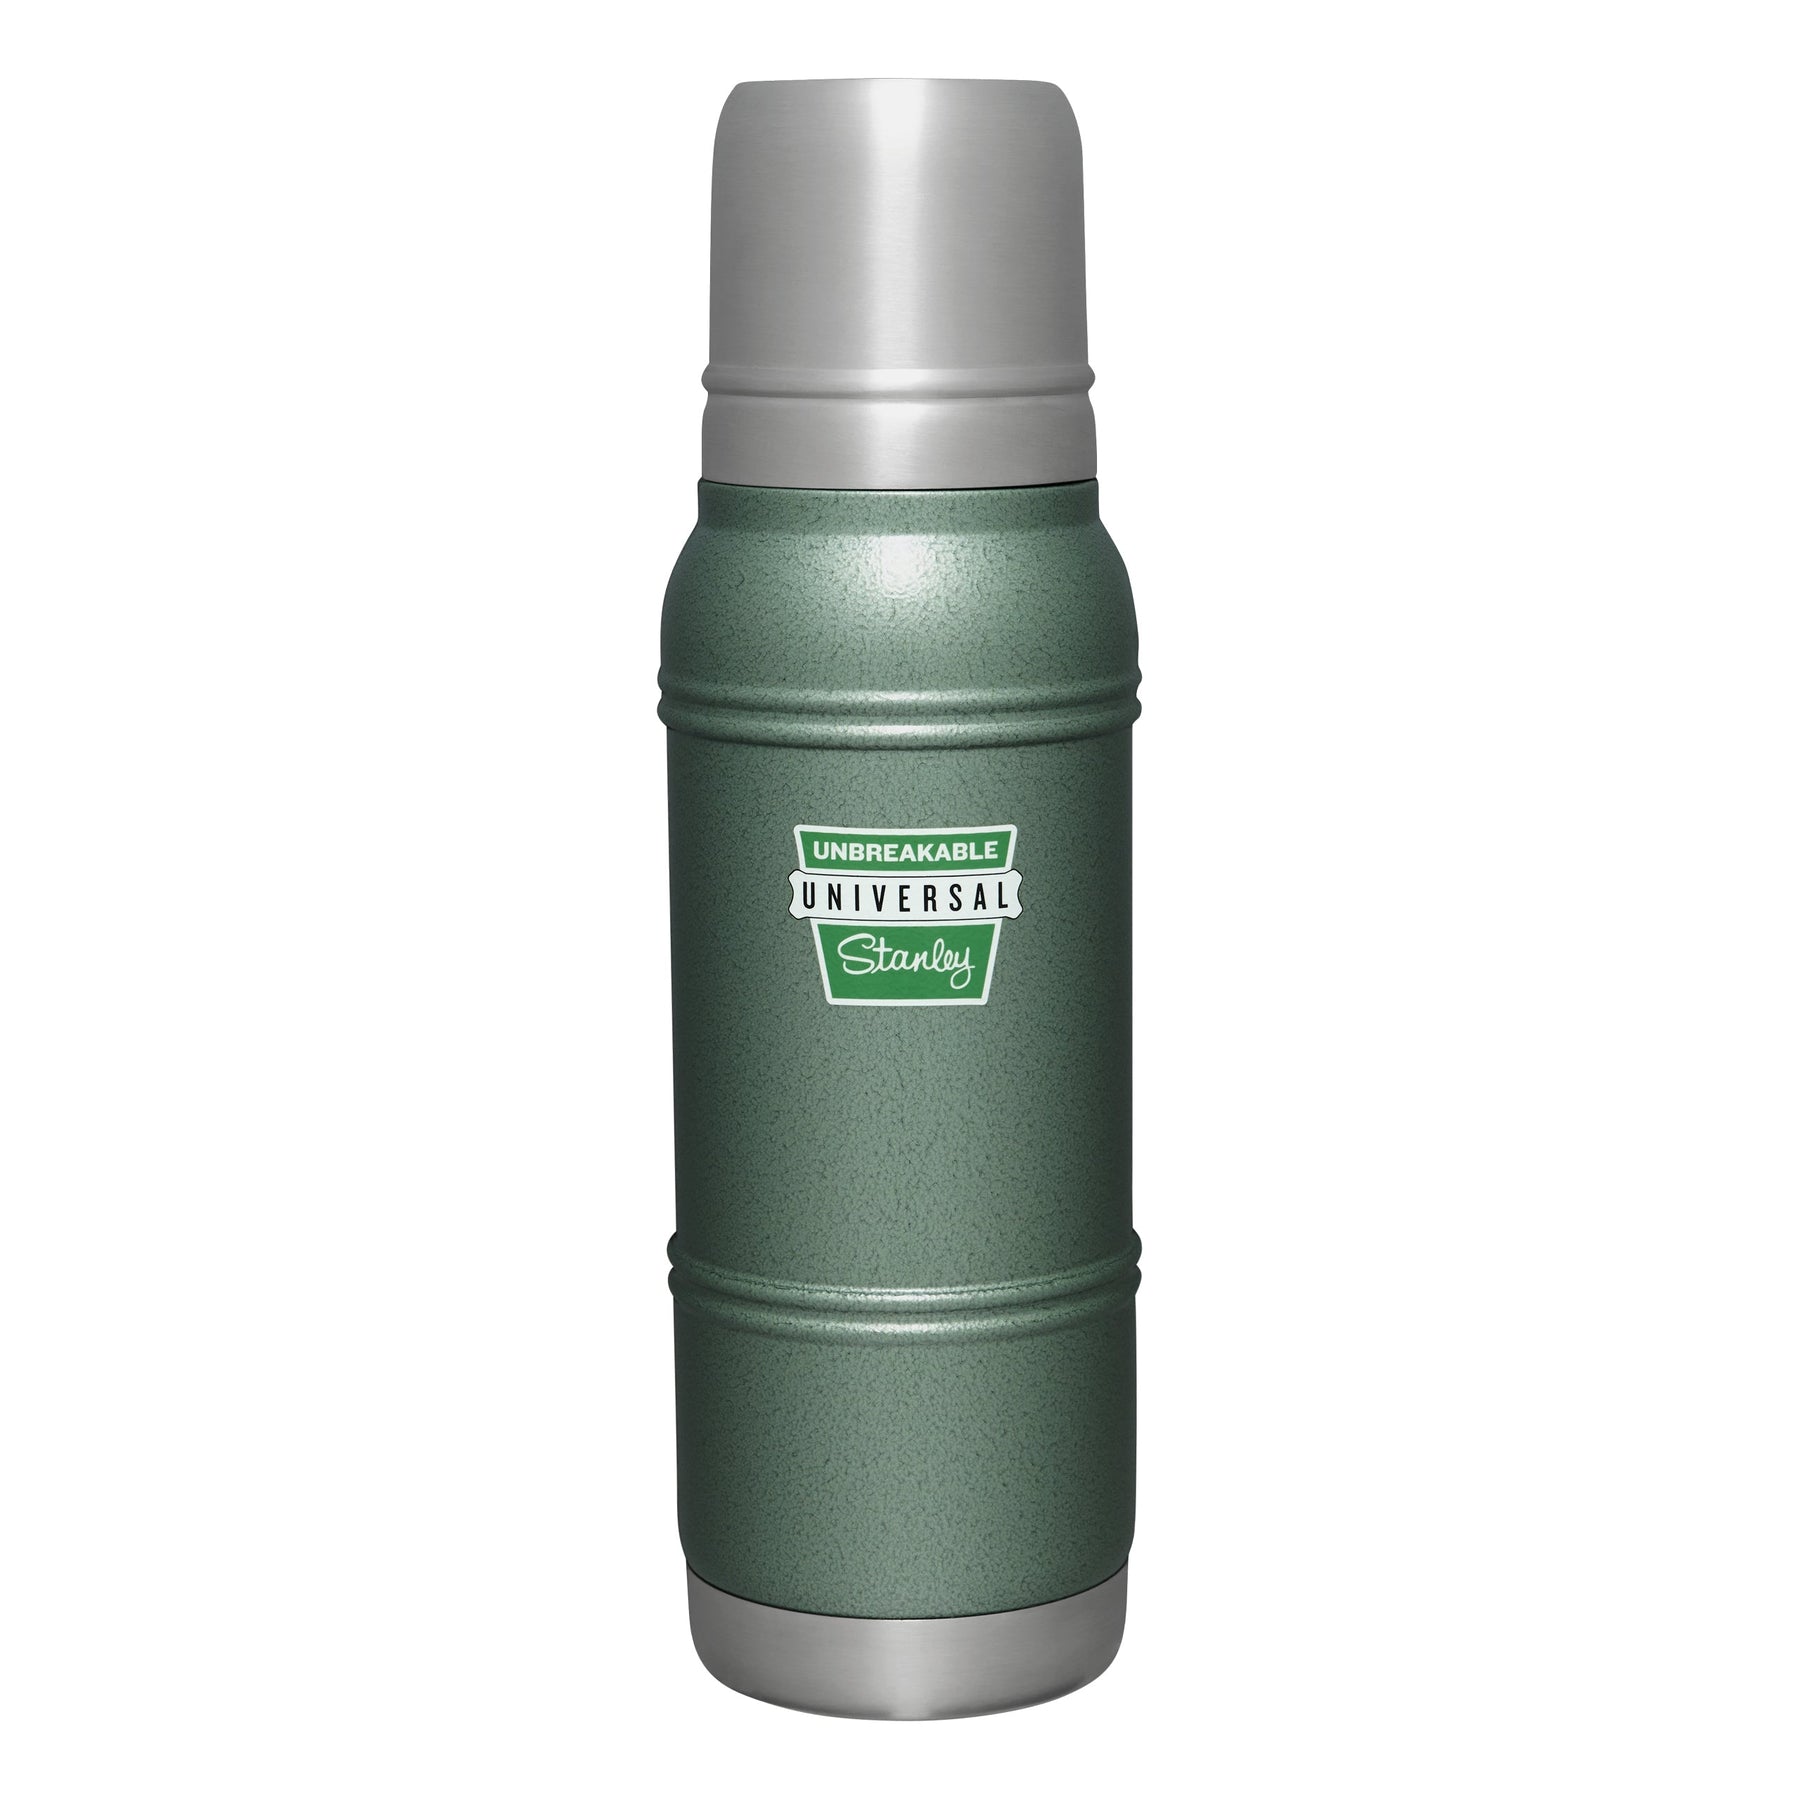 THE ARTISAN THERMAL BOTTLE - 1.4L- STANLEY